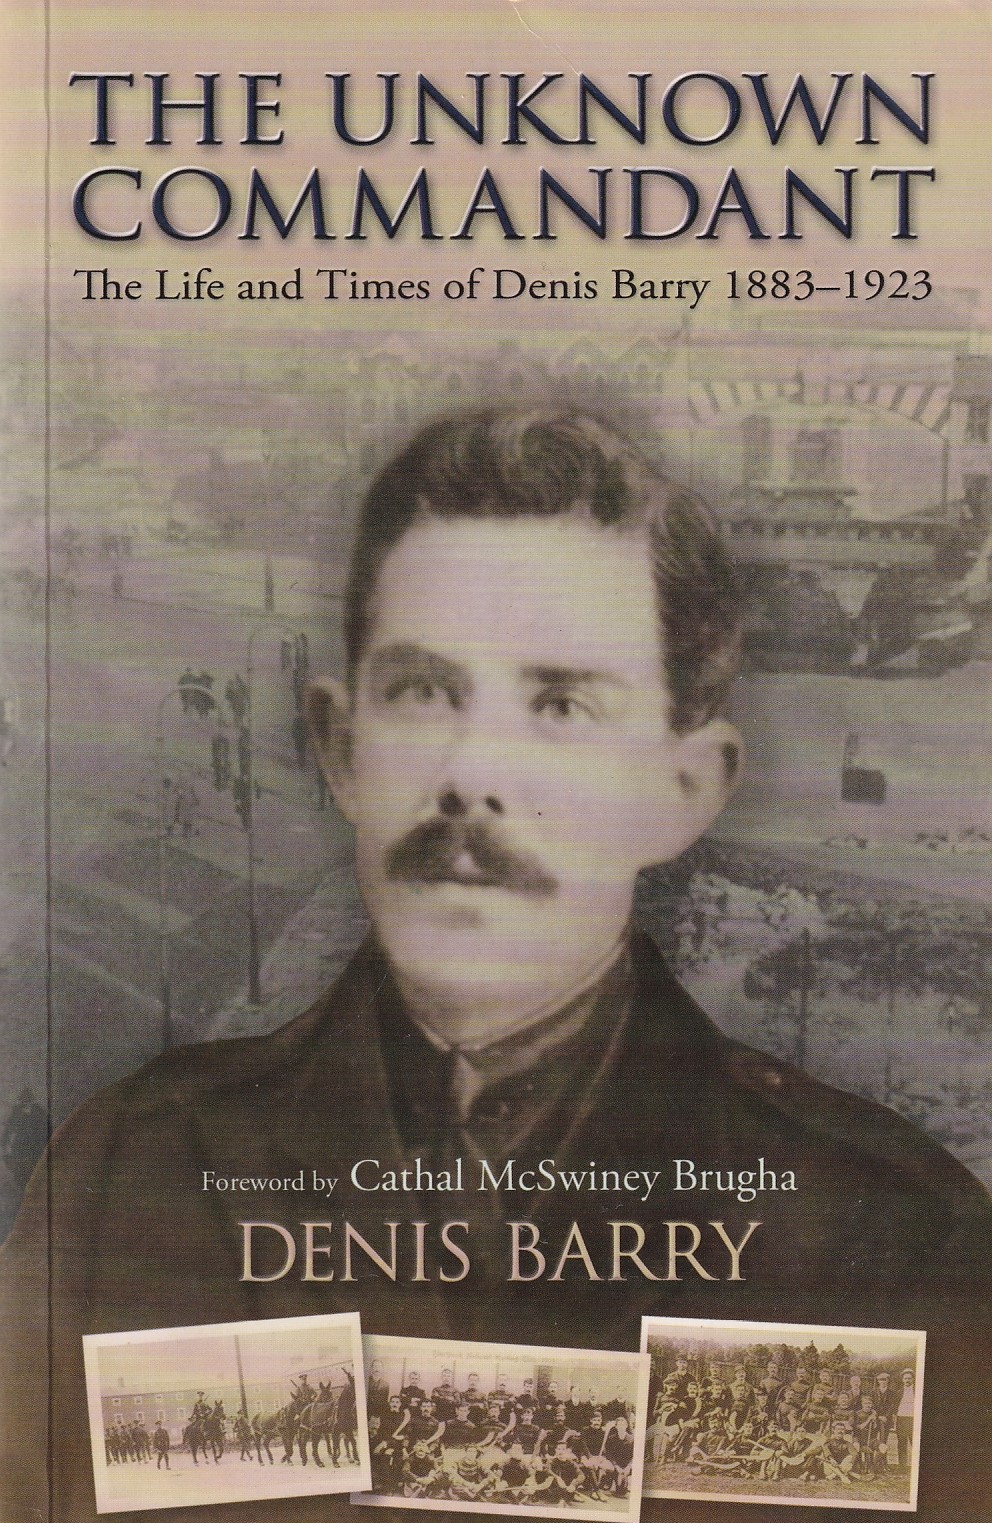 The Unknown Commandant: The Life and Times of Denis Barry 1883-1923 | Dennis Barry | Charlie Byrne's